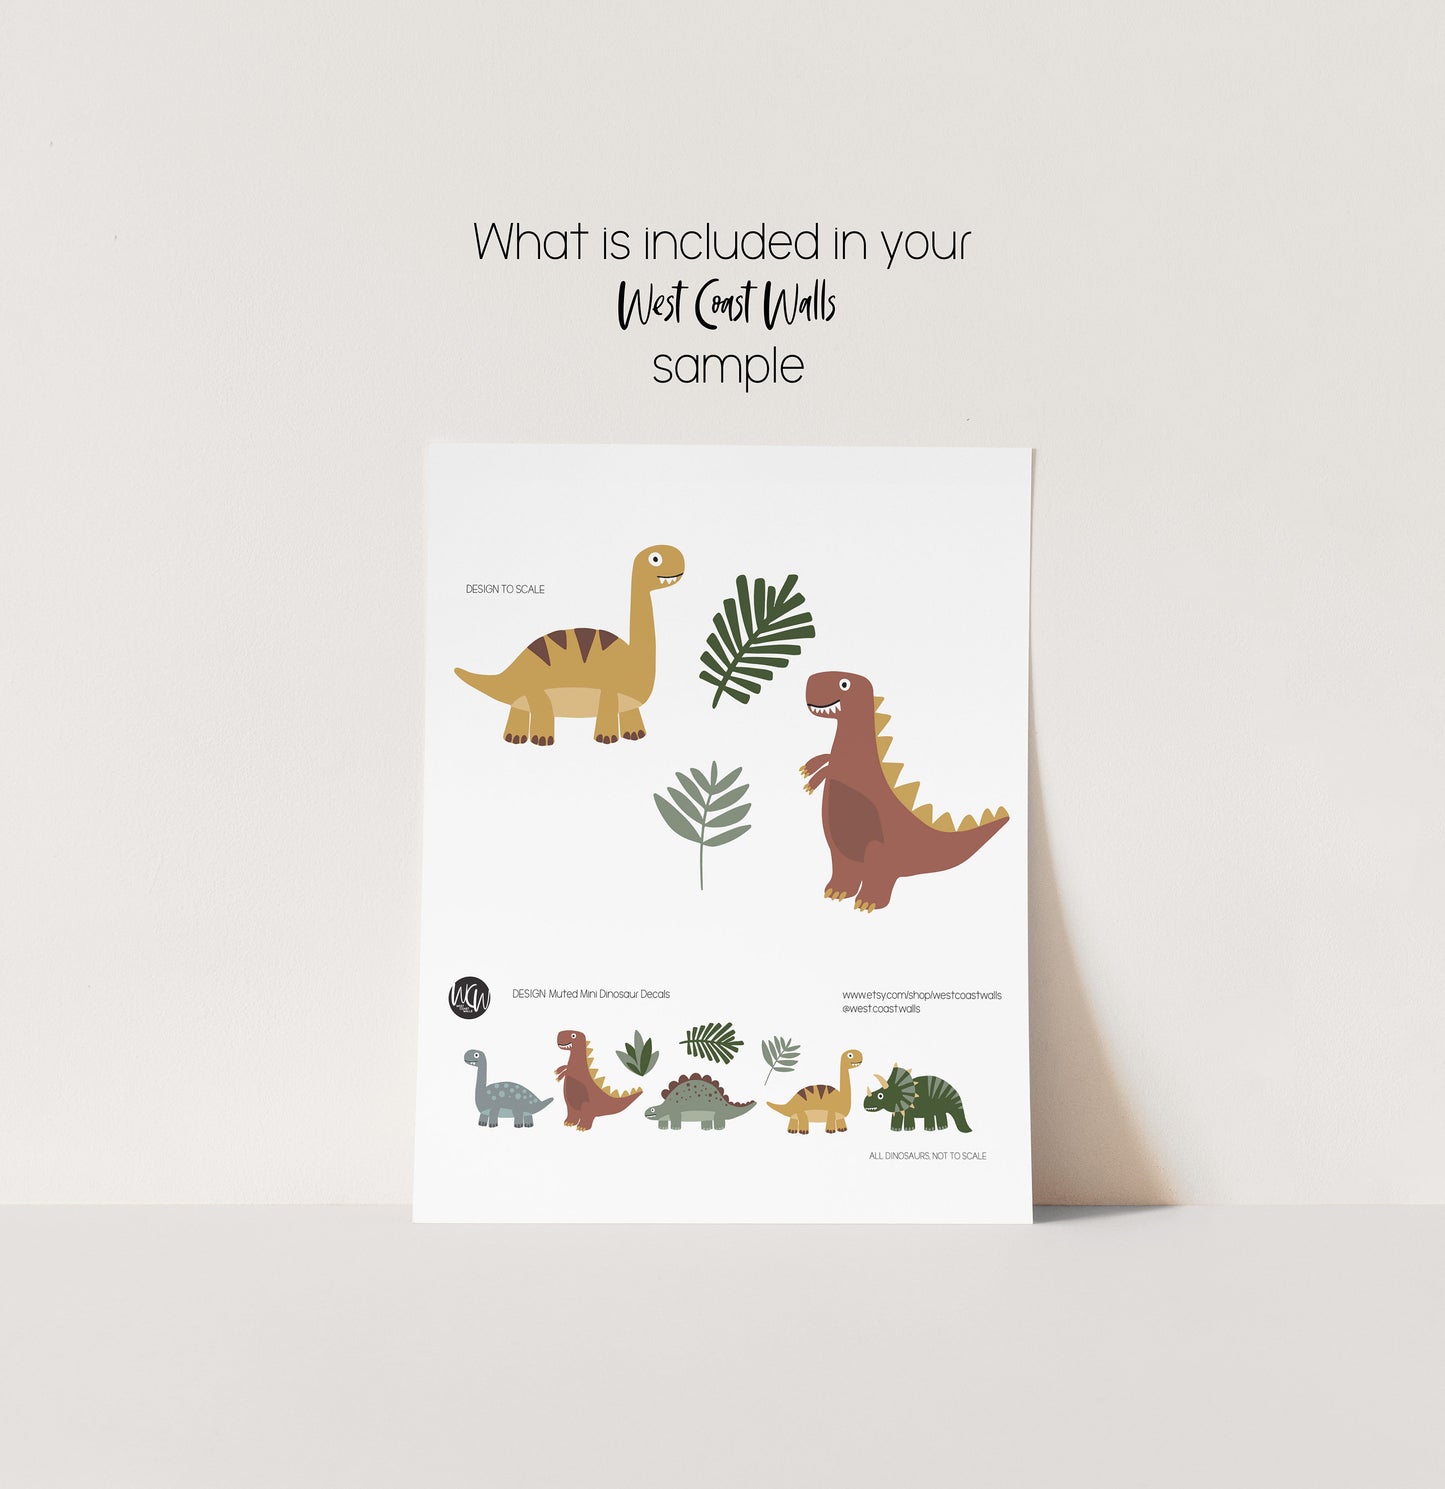 Muted Mini Dinosaur Removable Wall Decals